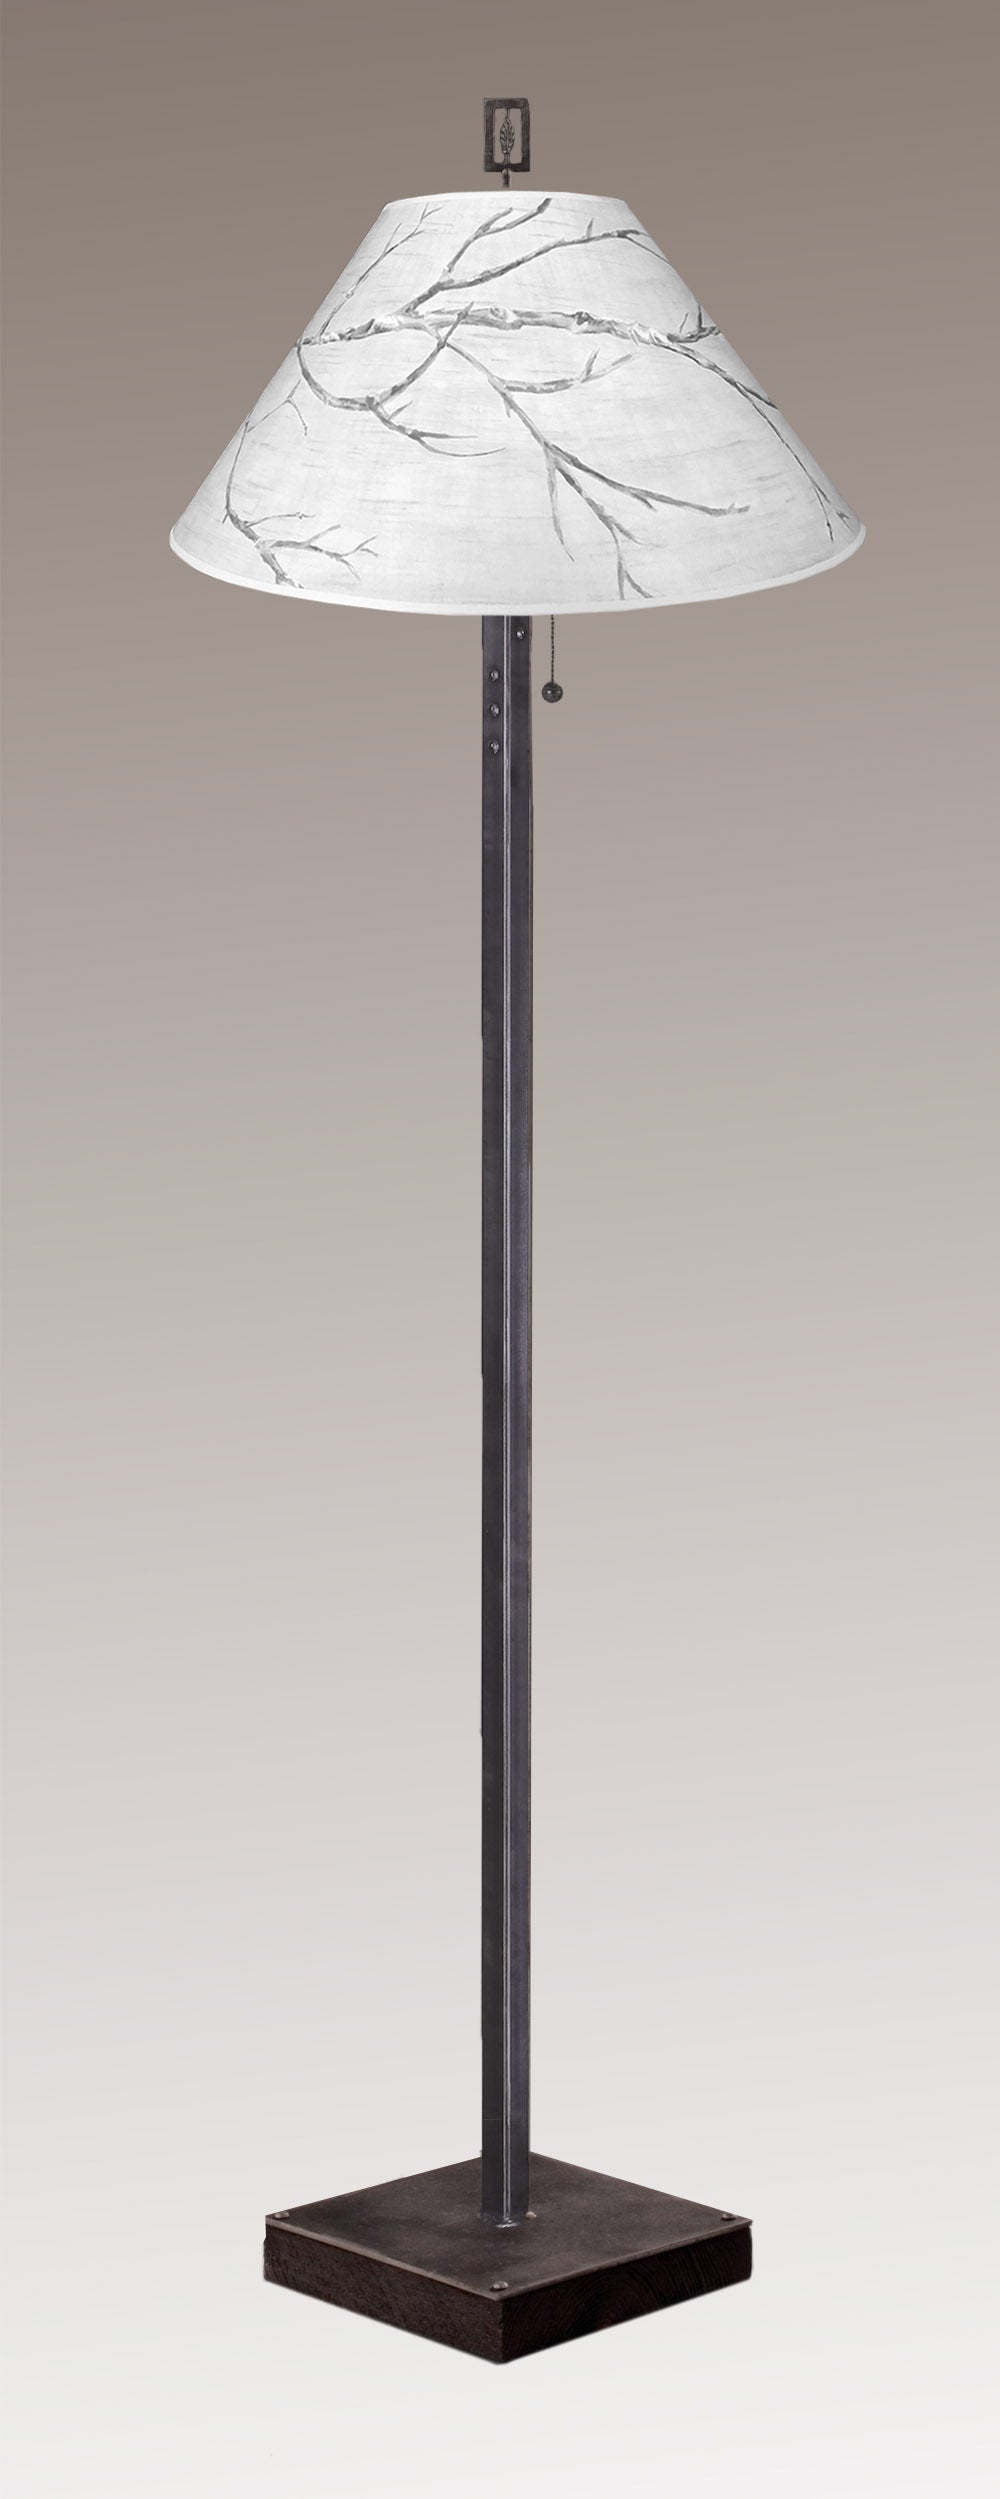 Janna Ugone & Co Floor Lamps Steel Floor Lamp on  Reclaimed Wood with Large Conical Shade in Sweeping Branch